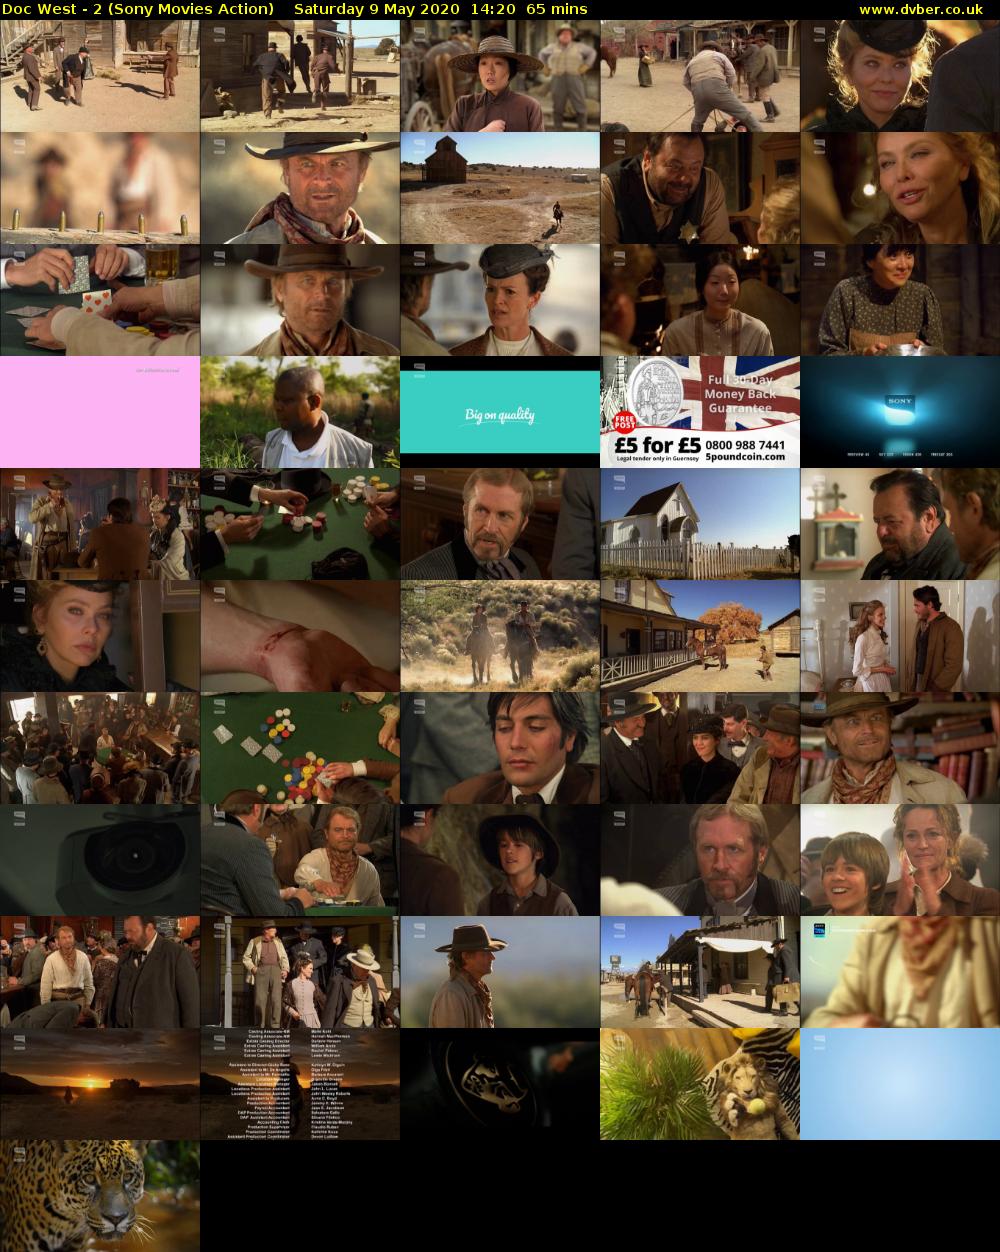 Doc West - 2 (Sony Movies Action) Saturday 9 May 2020 14:20 - 15:25